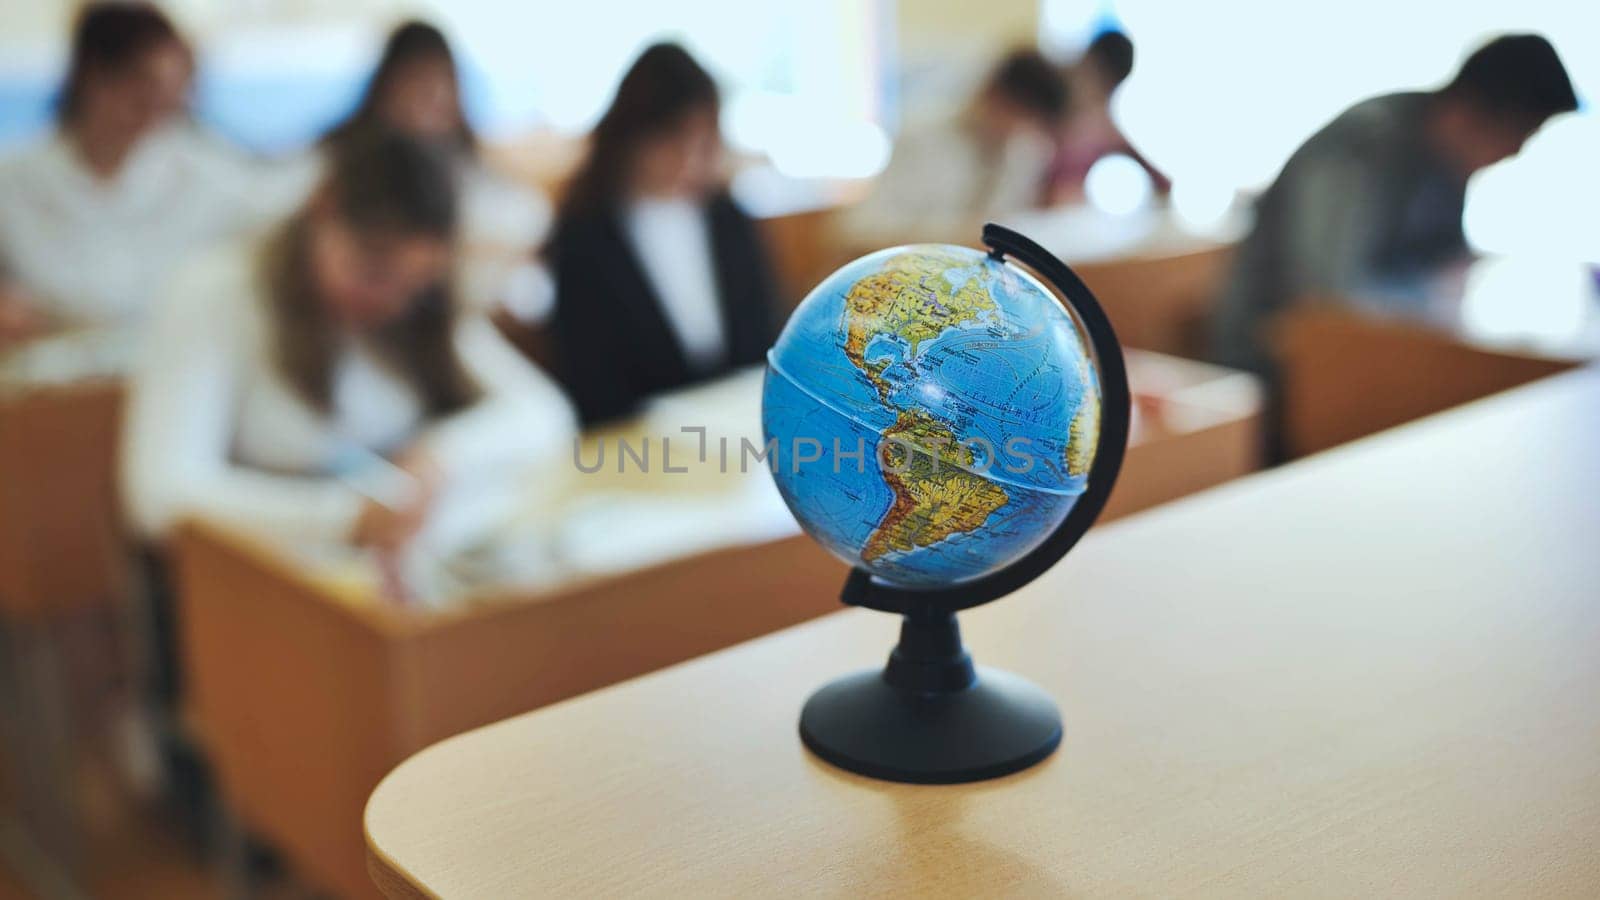 A globe of the world with textbooks in the background of a lesson in a school classroom. The globe shows North and South America. by DovidPro